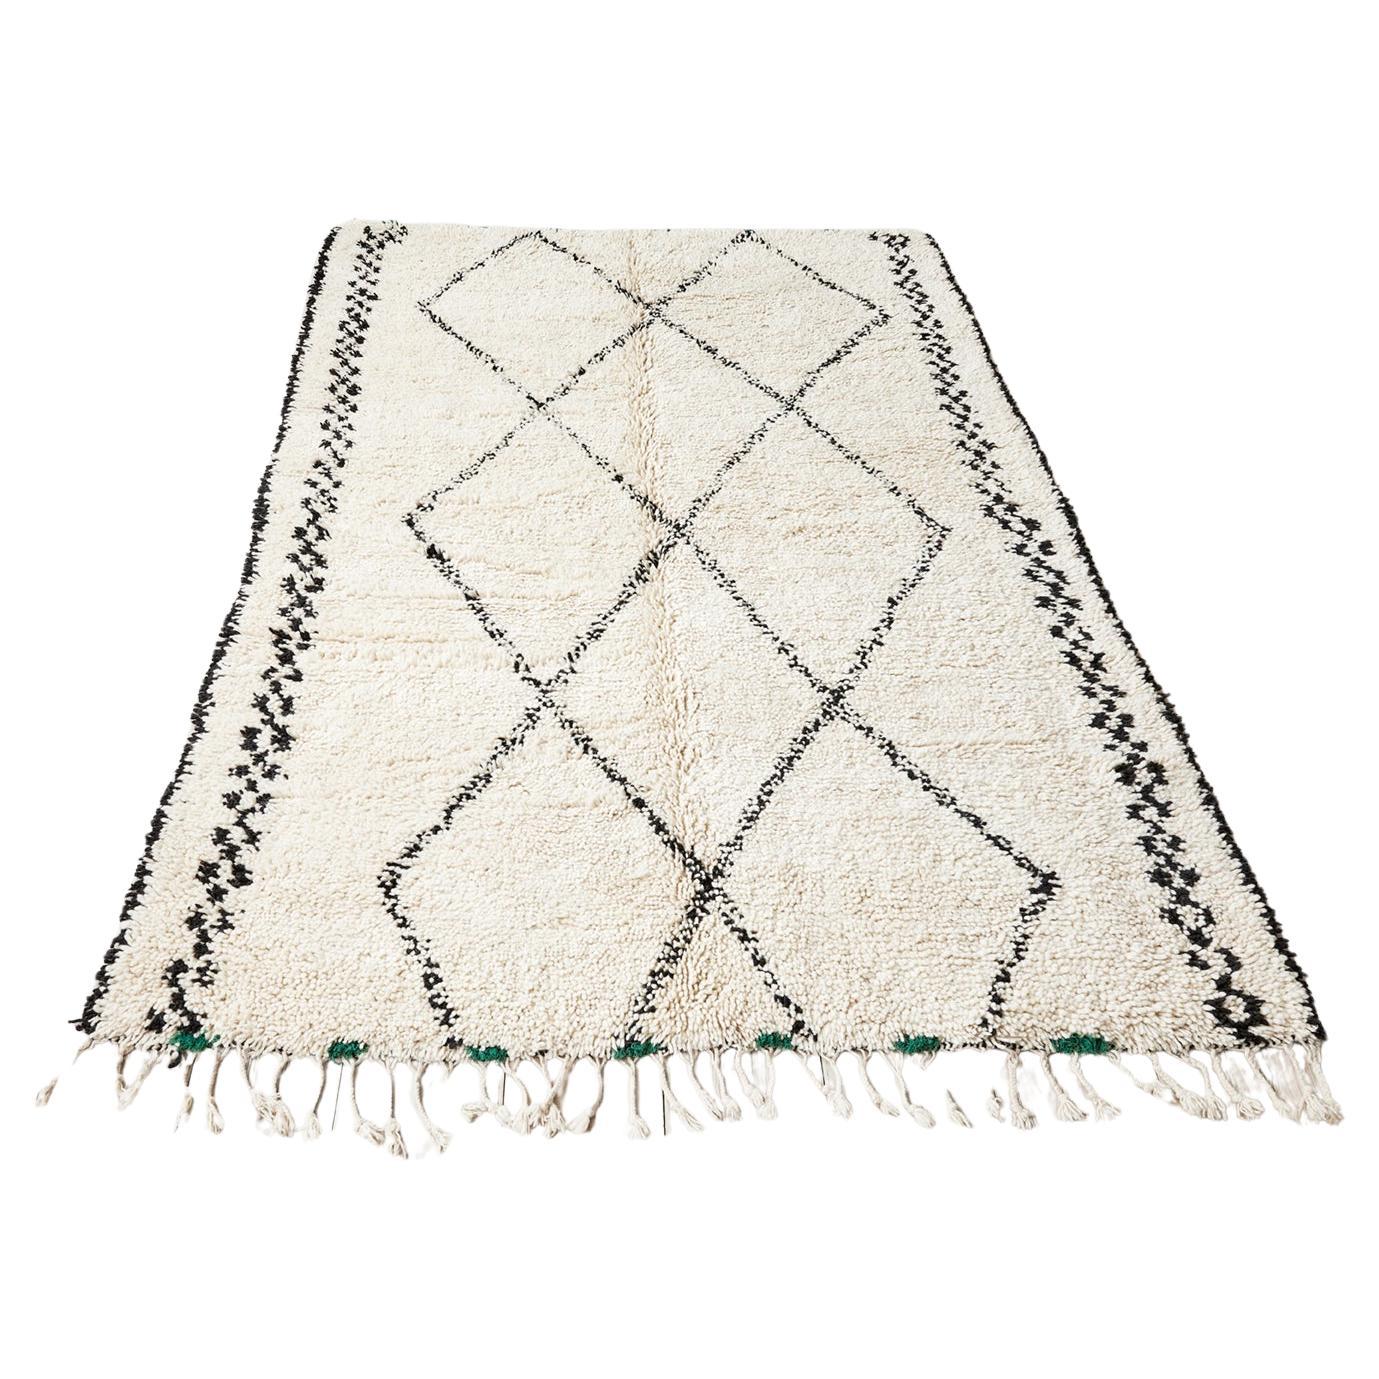 Vintage Beni Ouarain Rug in White with Black Stripes, Morocco, 20th Century For Sale